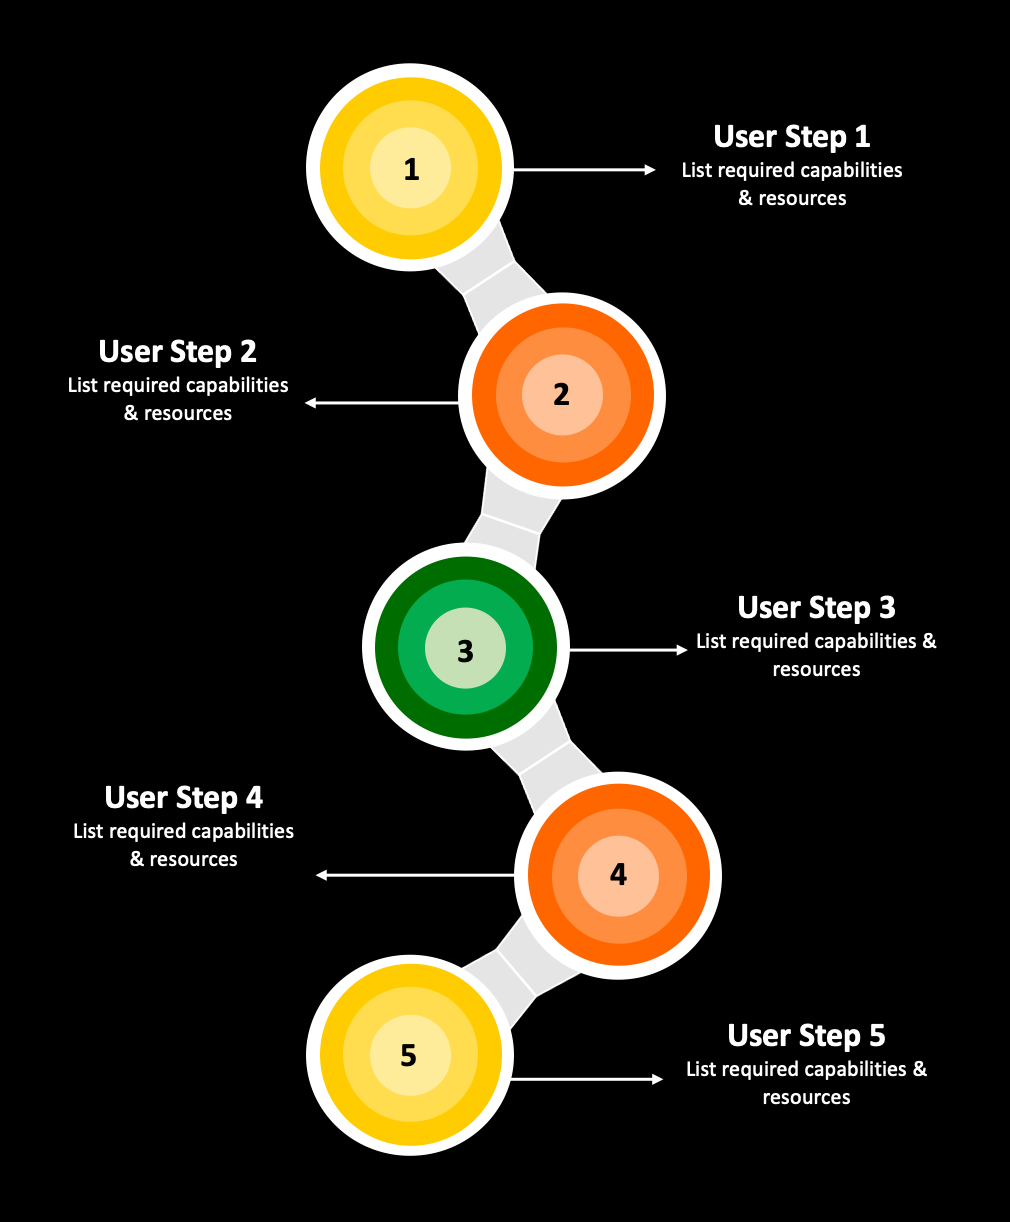 Image shows a user journey map from steps one to five. There is written guidance to document the capabilities and resources needed for each step of the user journey.